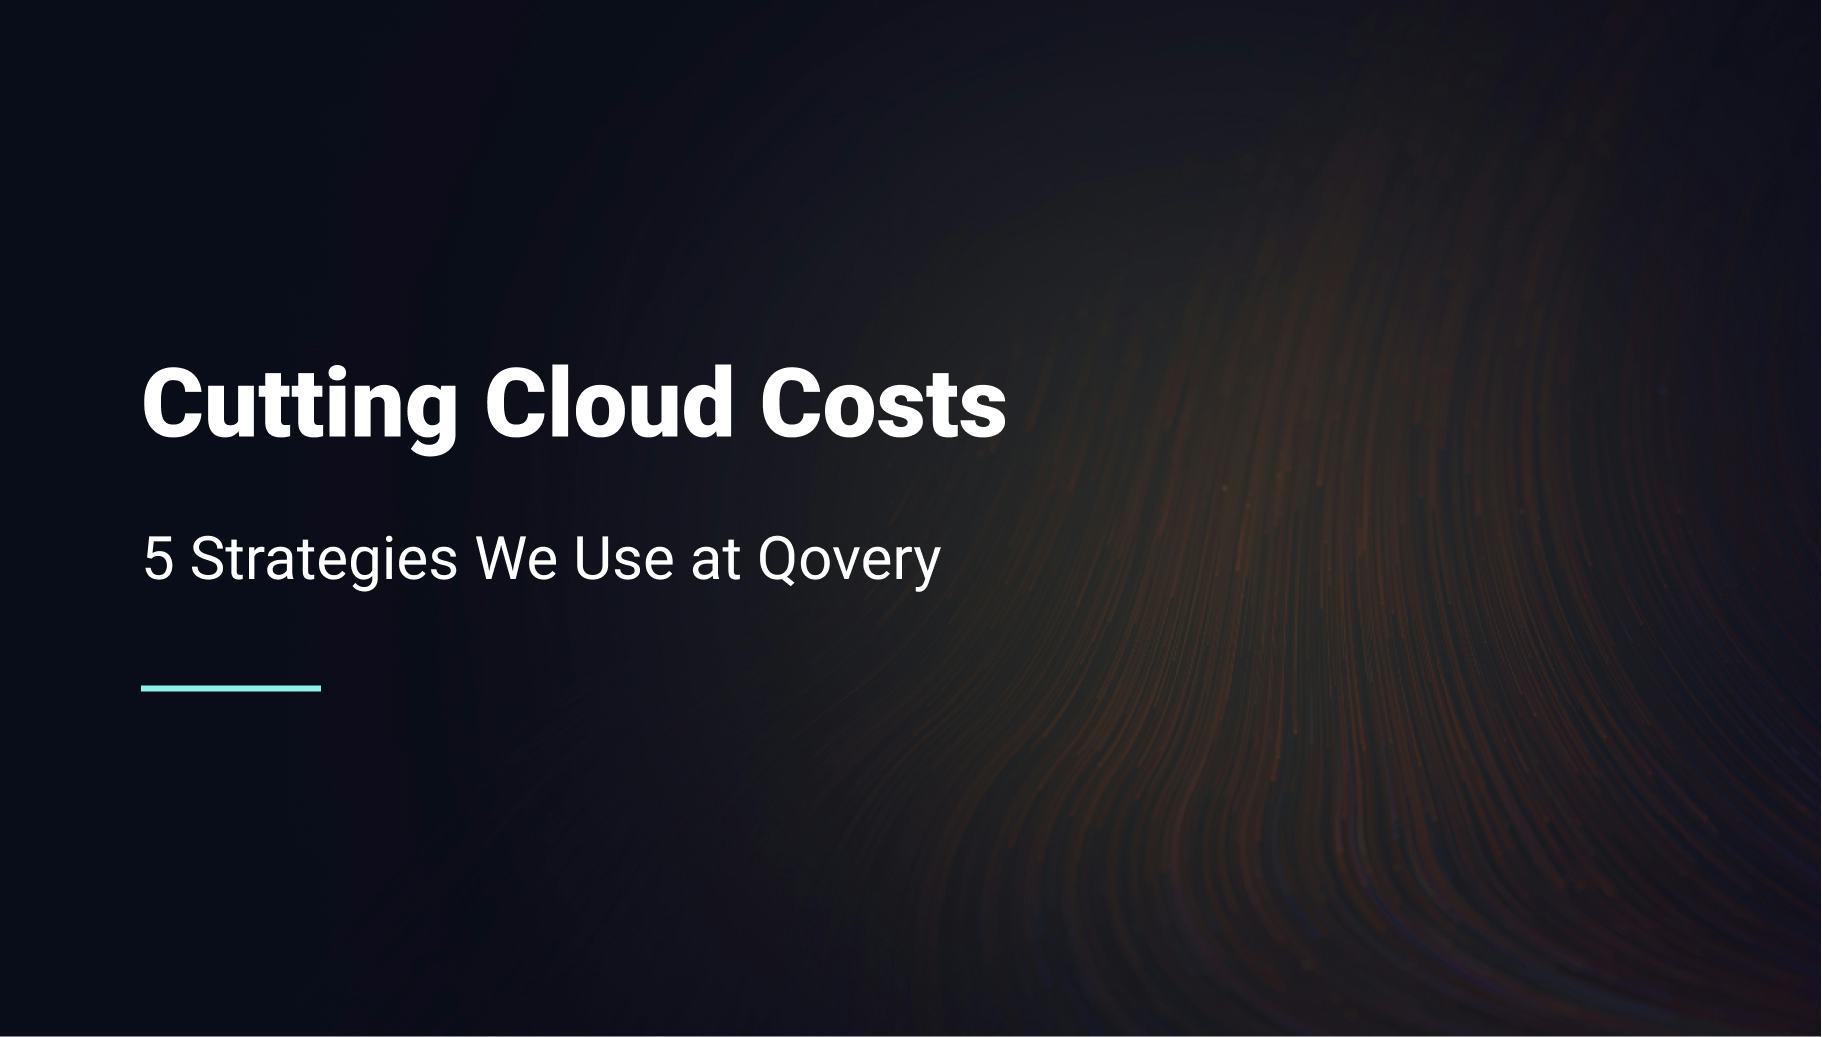 Cutting Cloud Costs: 5 Strategies We Use at Qovery